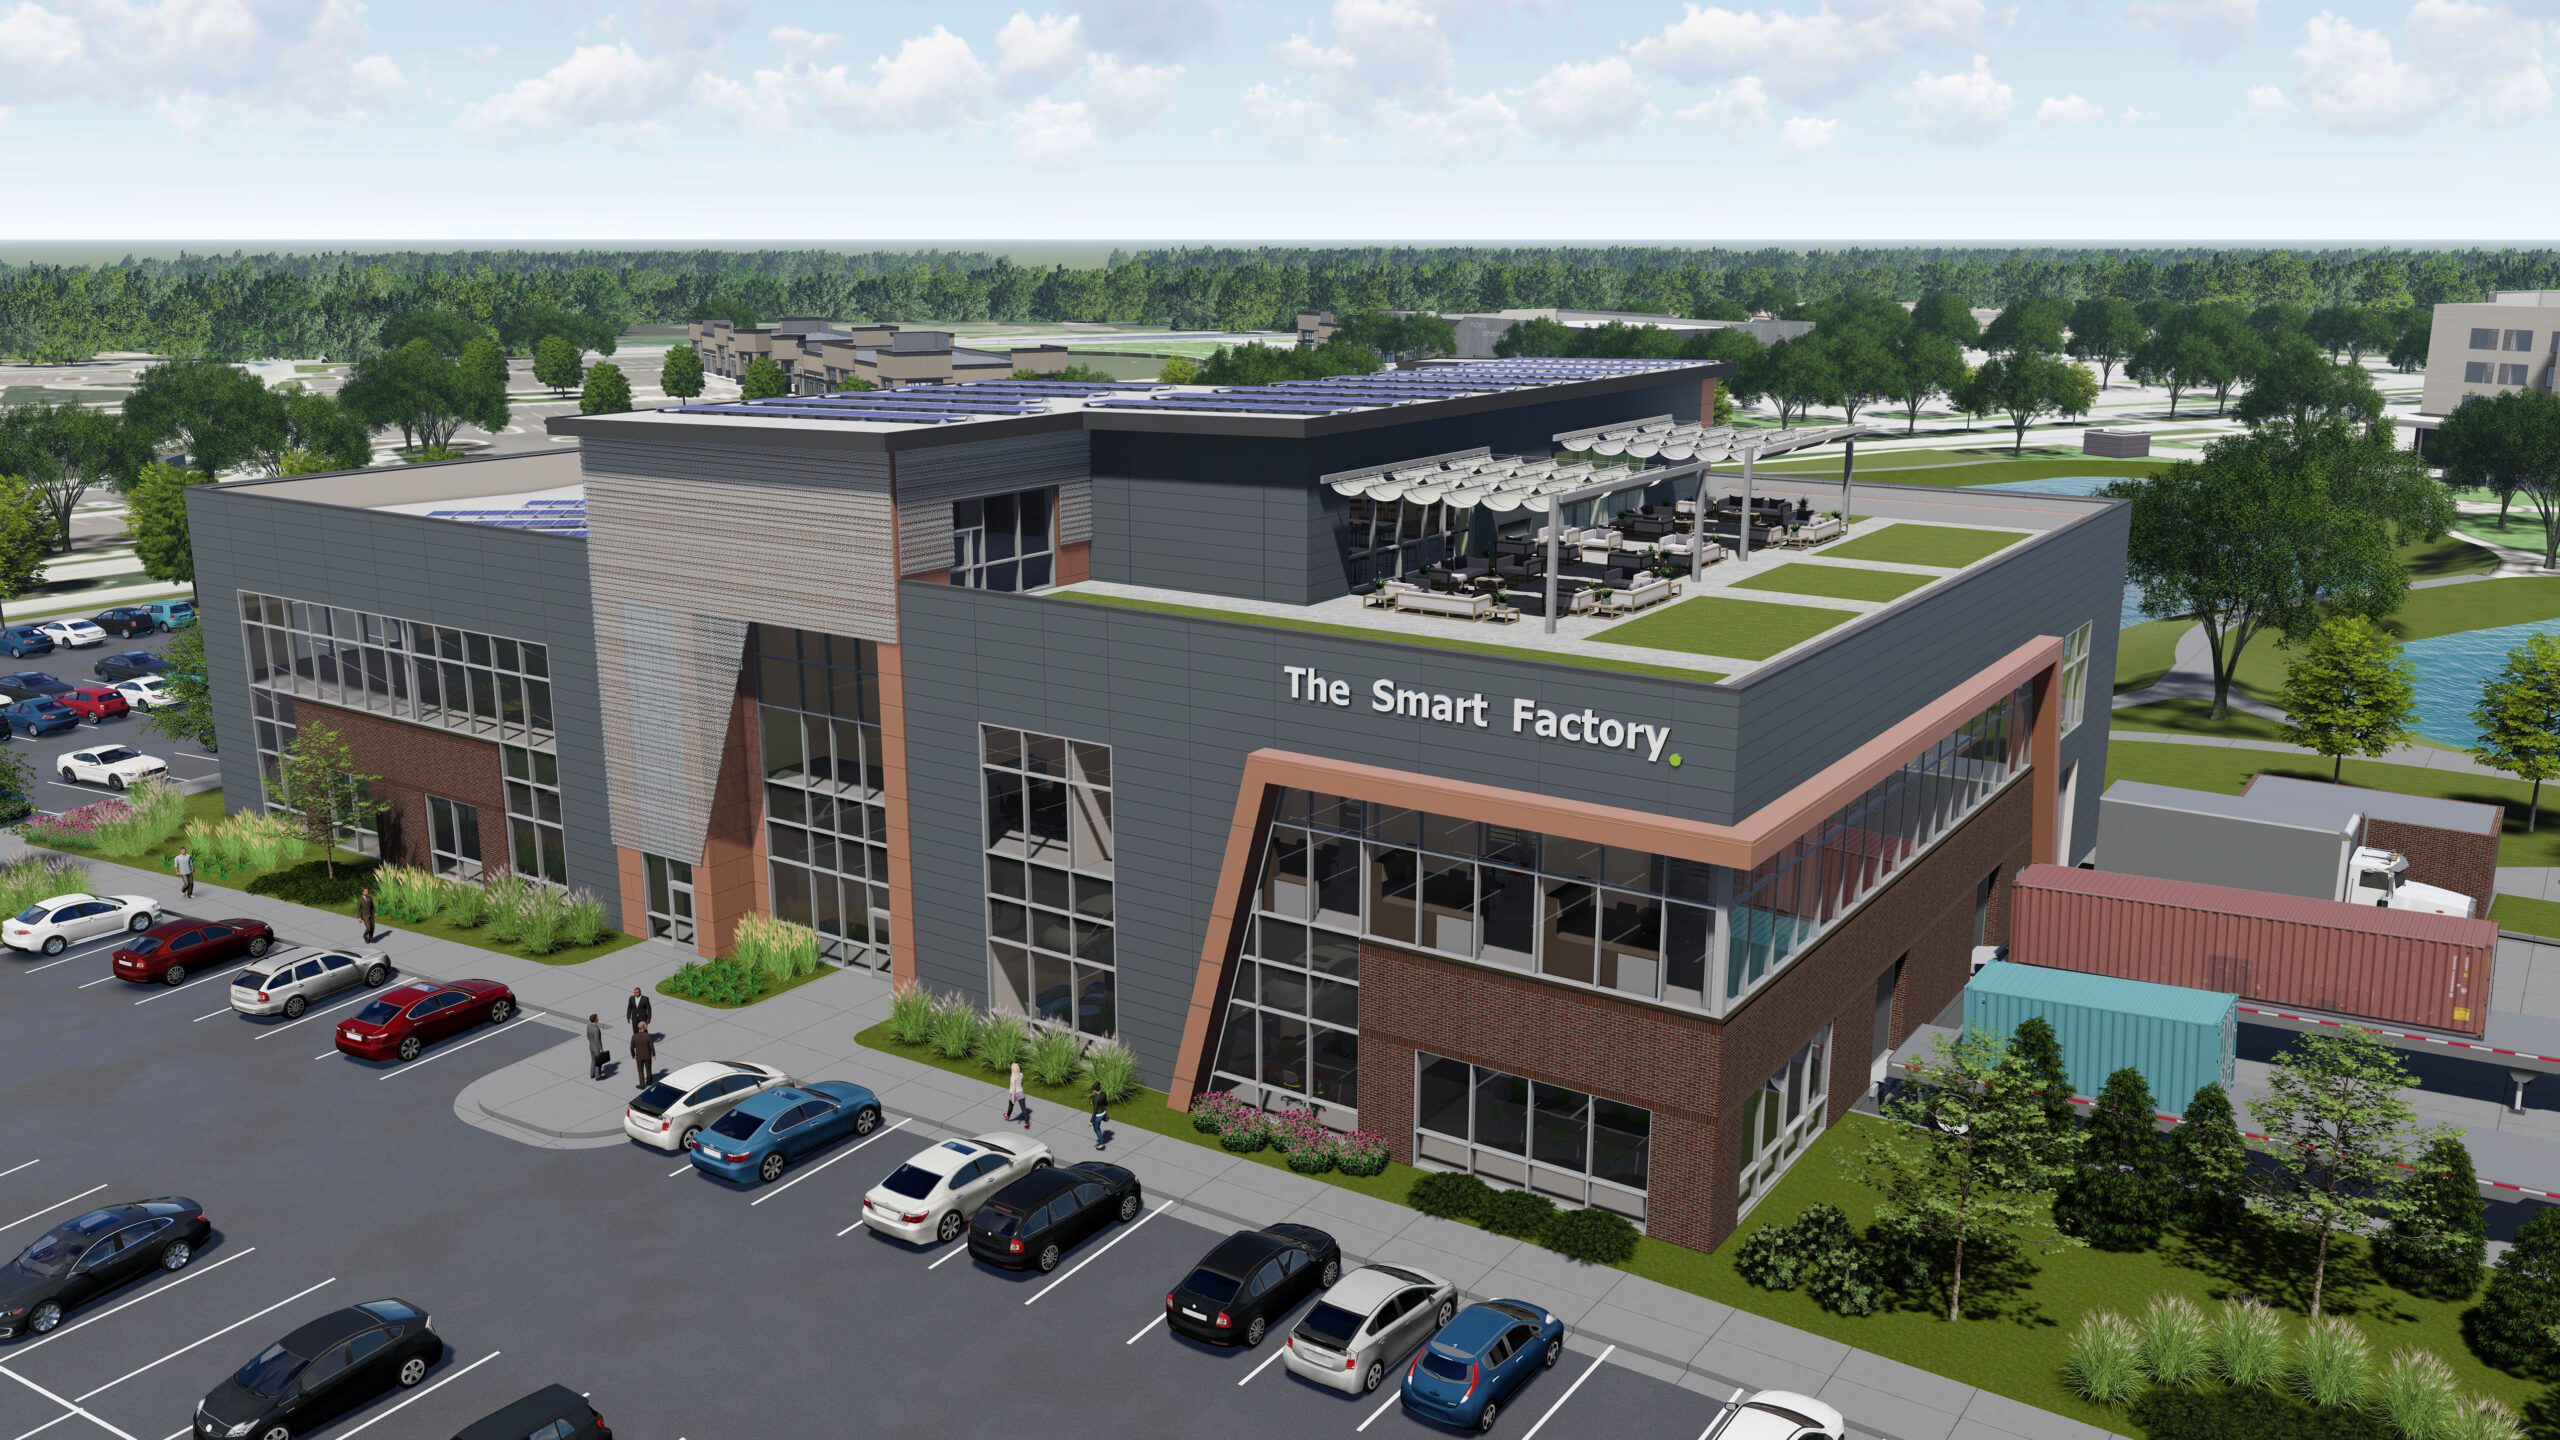 Rendering of the exterior of The Smart Factory building.